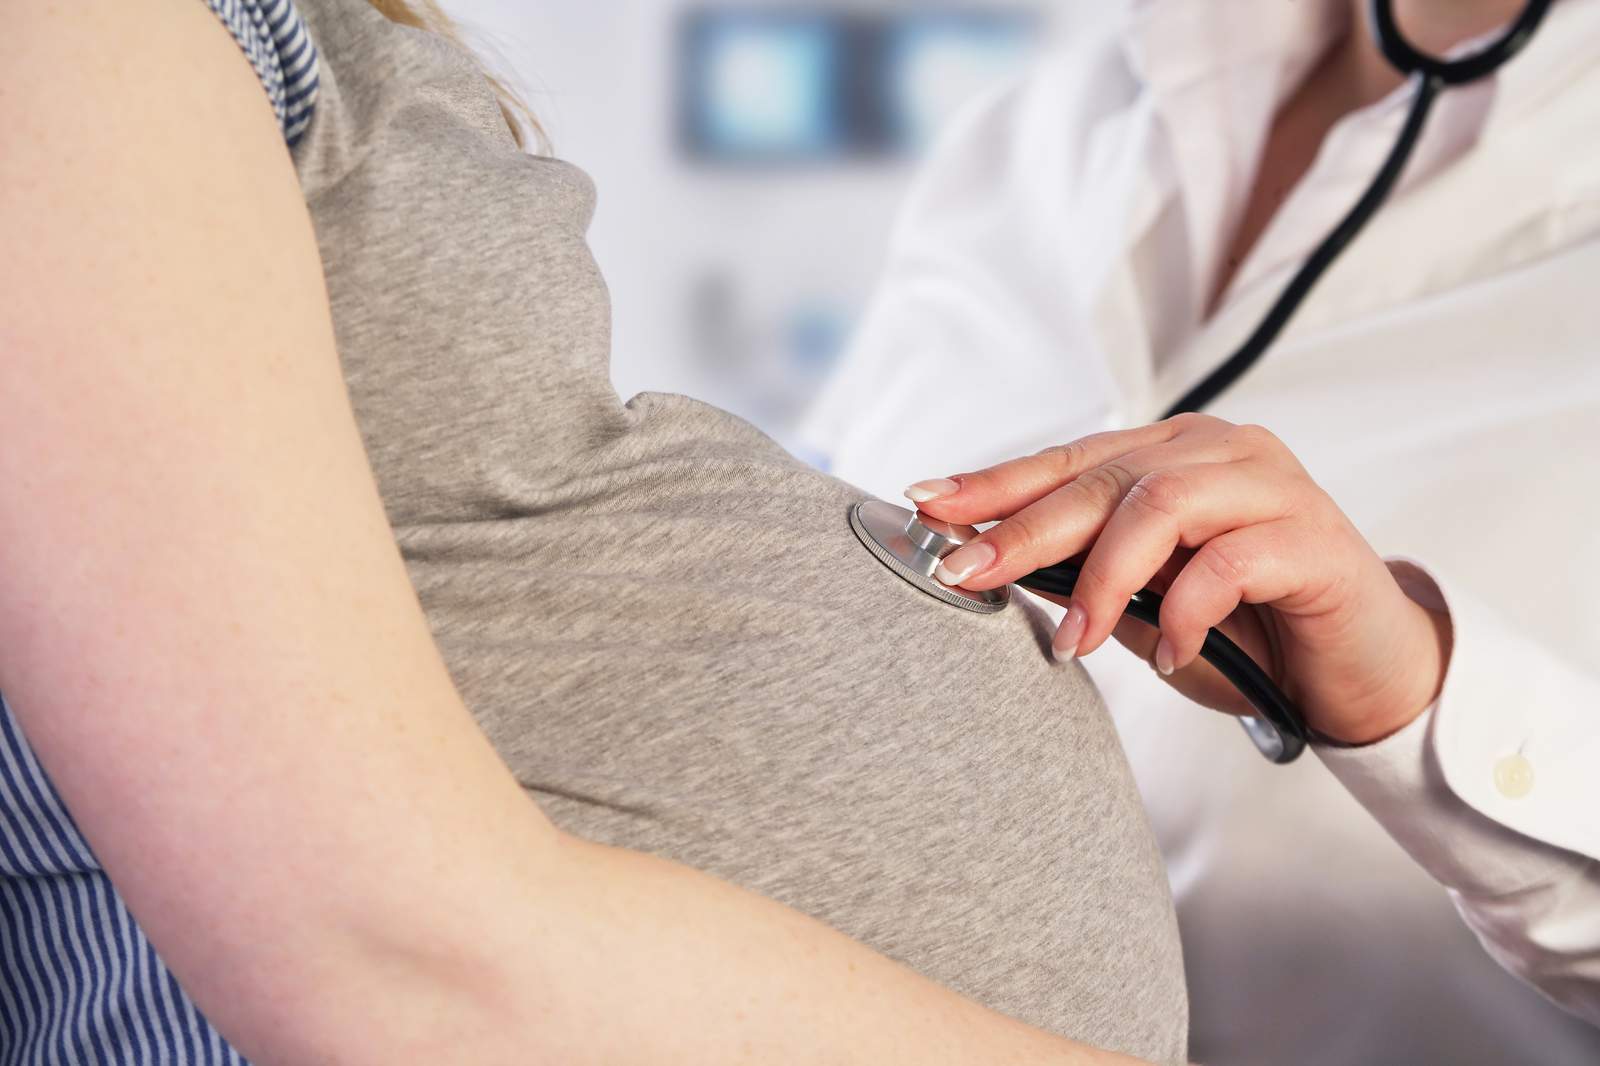 How researchers are testing COVID-19 drugs for pregnant women